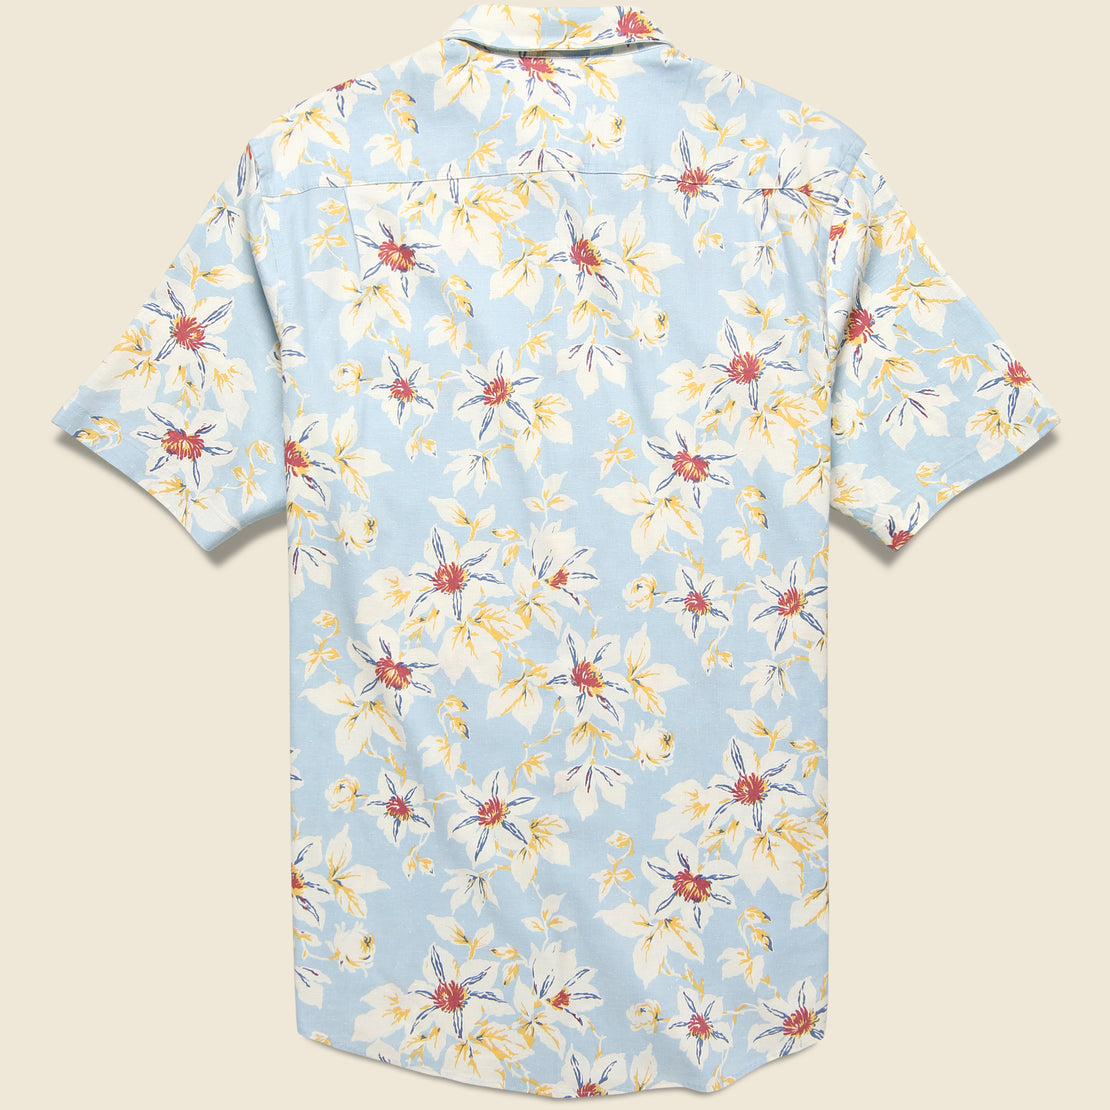 Breeze Shirt - Blue Sky Floral - Faherty - STAG Provisions - Tops - S/S Woven - Floral